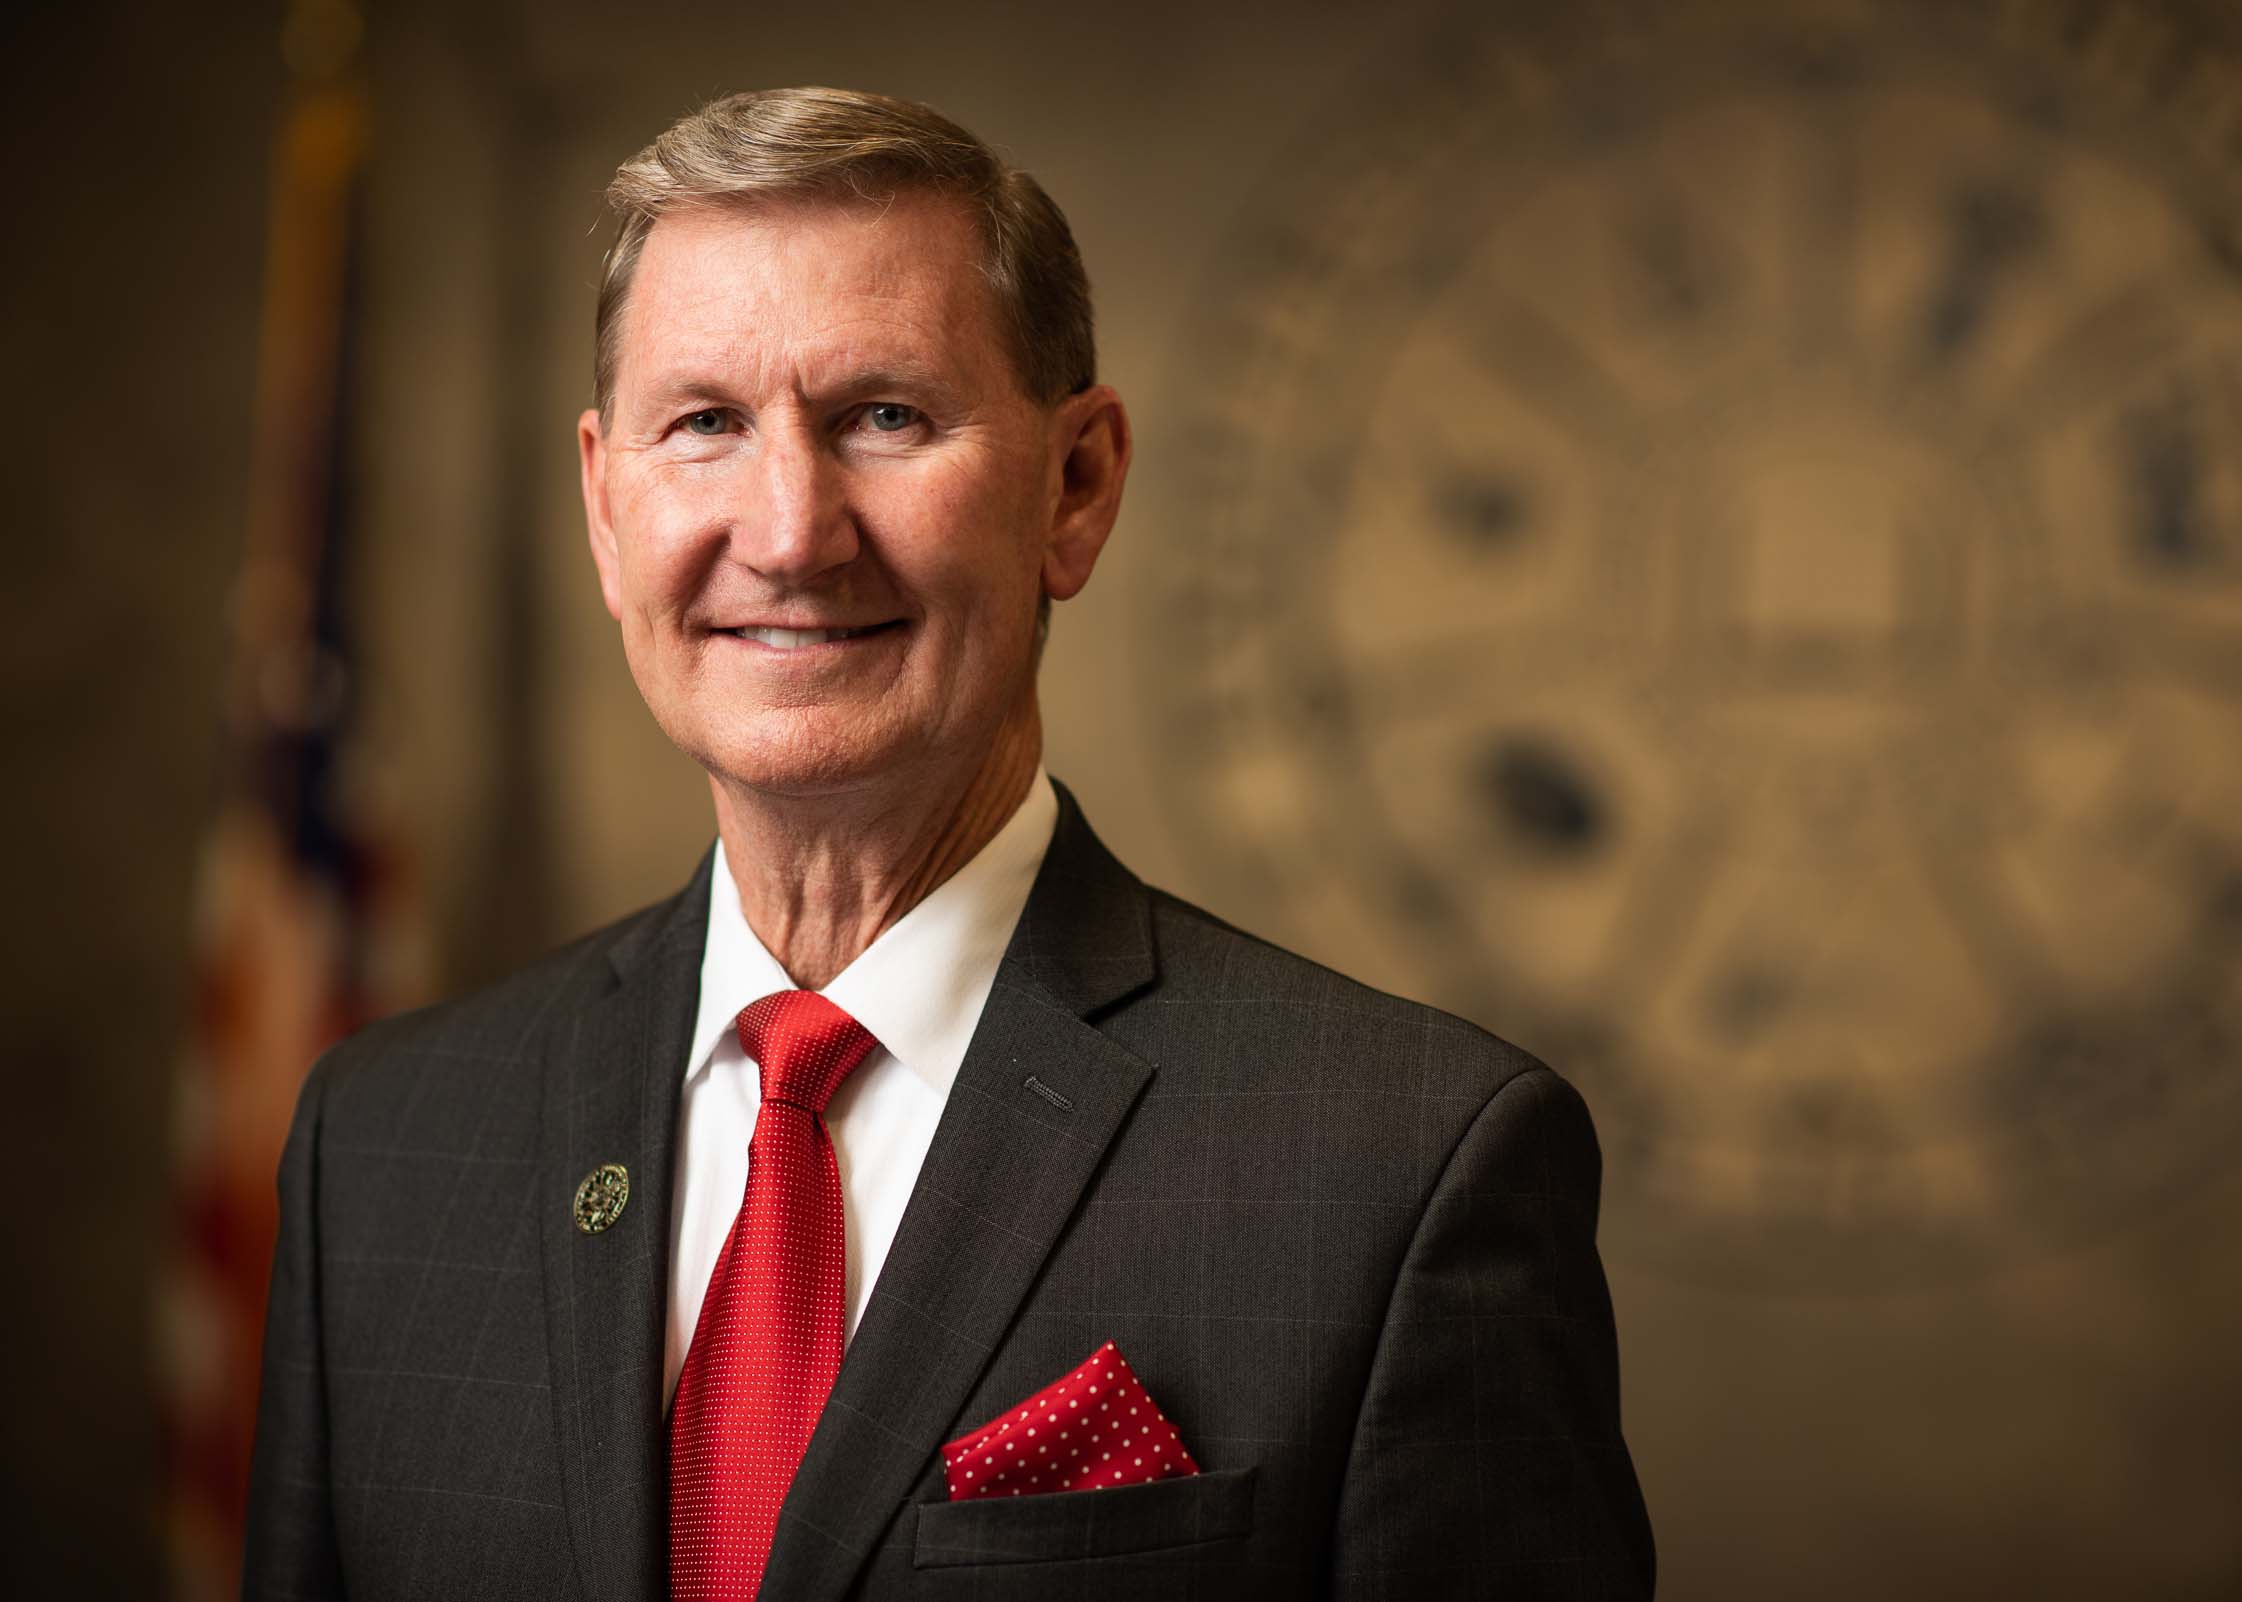 University of Nebraska President Ted Carter will deliver the keynote address at the Nebraska College of Technical Agriculture commencement on May 6, 2021. (University of Nebraska photo)